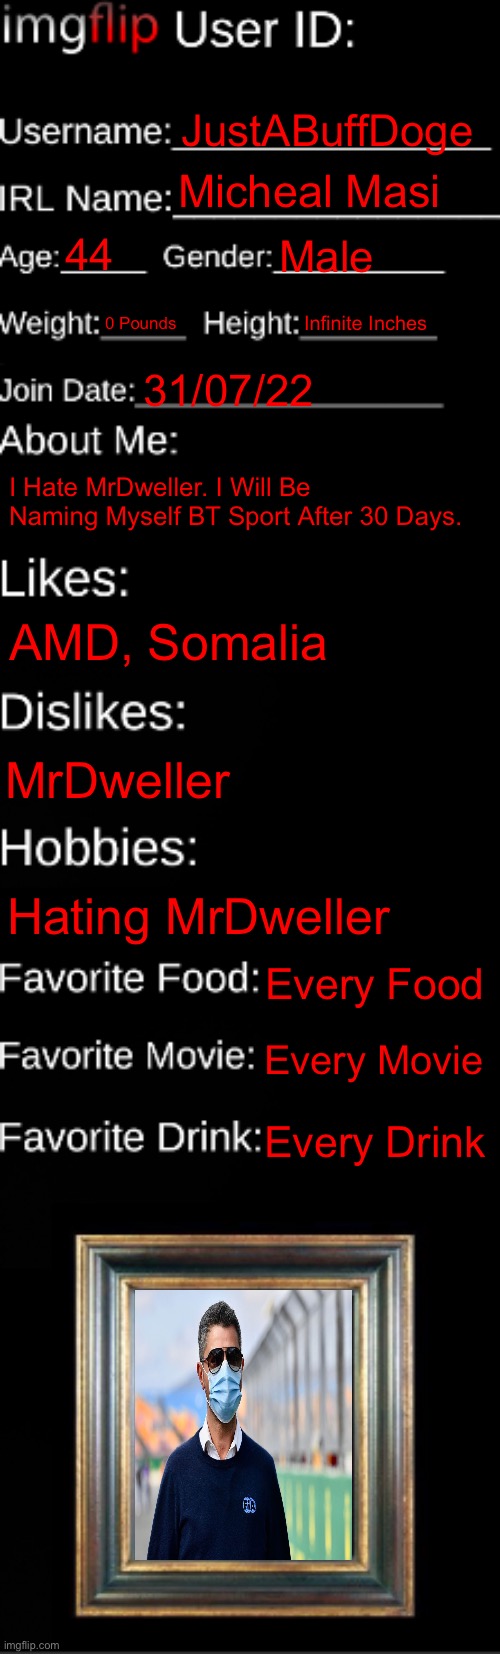 My ID Card | JustABuffDoge; Micheal Masi; 44; Male; 0 Pounds; Infinite Inches; 31/07/22; I Hate MrDweller. I Will Be Naming Myself BT Sport After 30 Days. AMD, Somalia; MrDweller; Hating MrDweller; Every Food; Every Movie; Every Drink | image tagged in imgflip id card | made w/ Imgflip meme maker